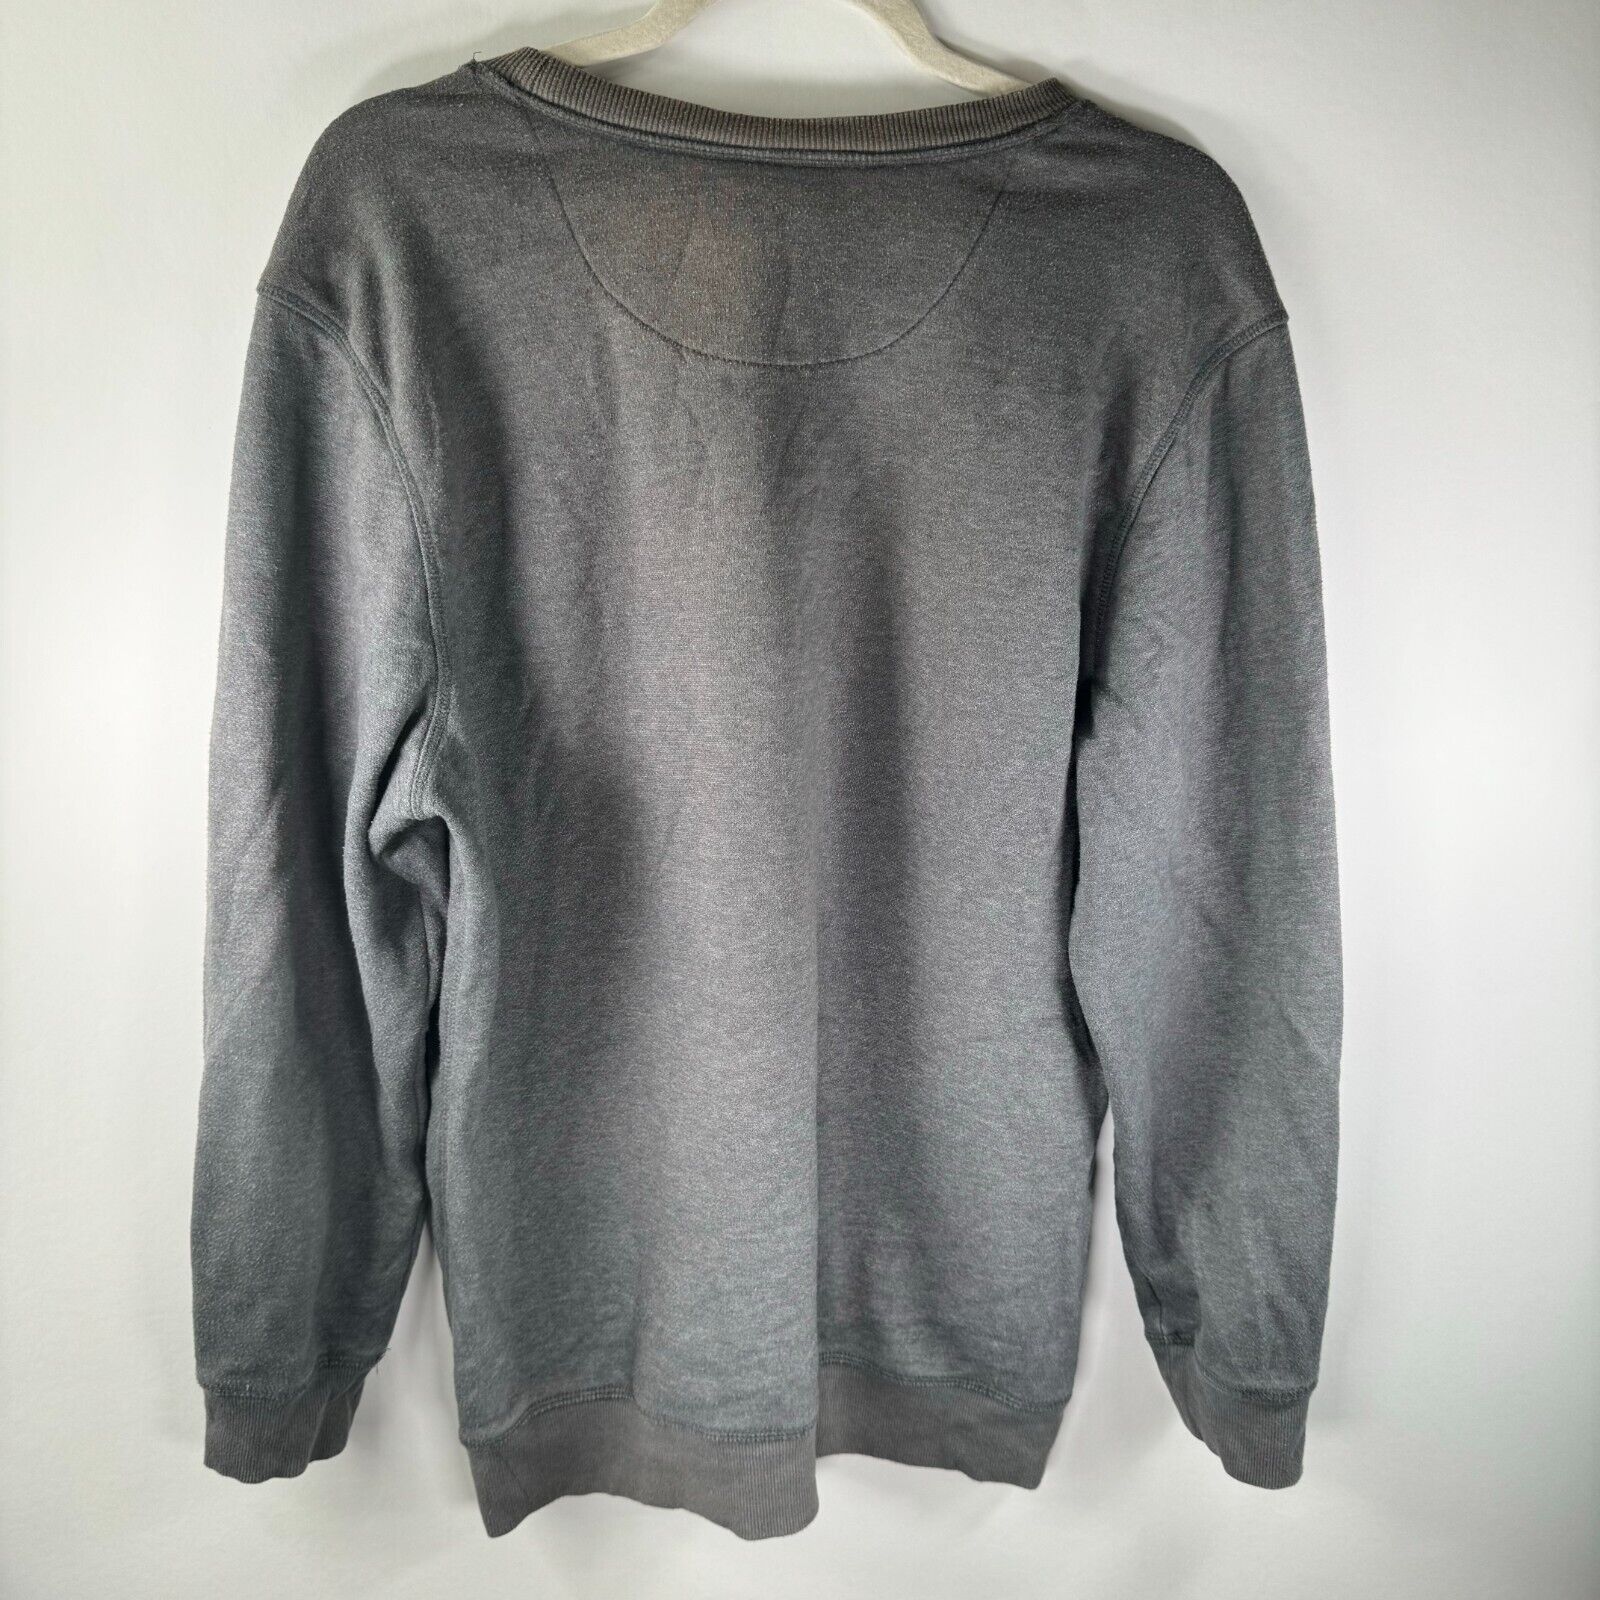 Great Northwest Clothing Company Soft Cotton Pullover Sweater Gray Mens Size M